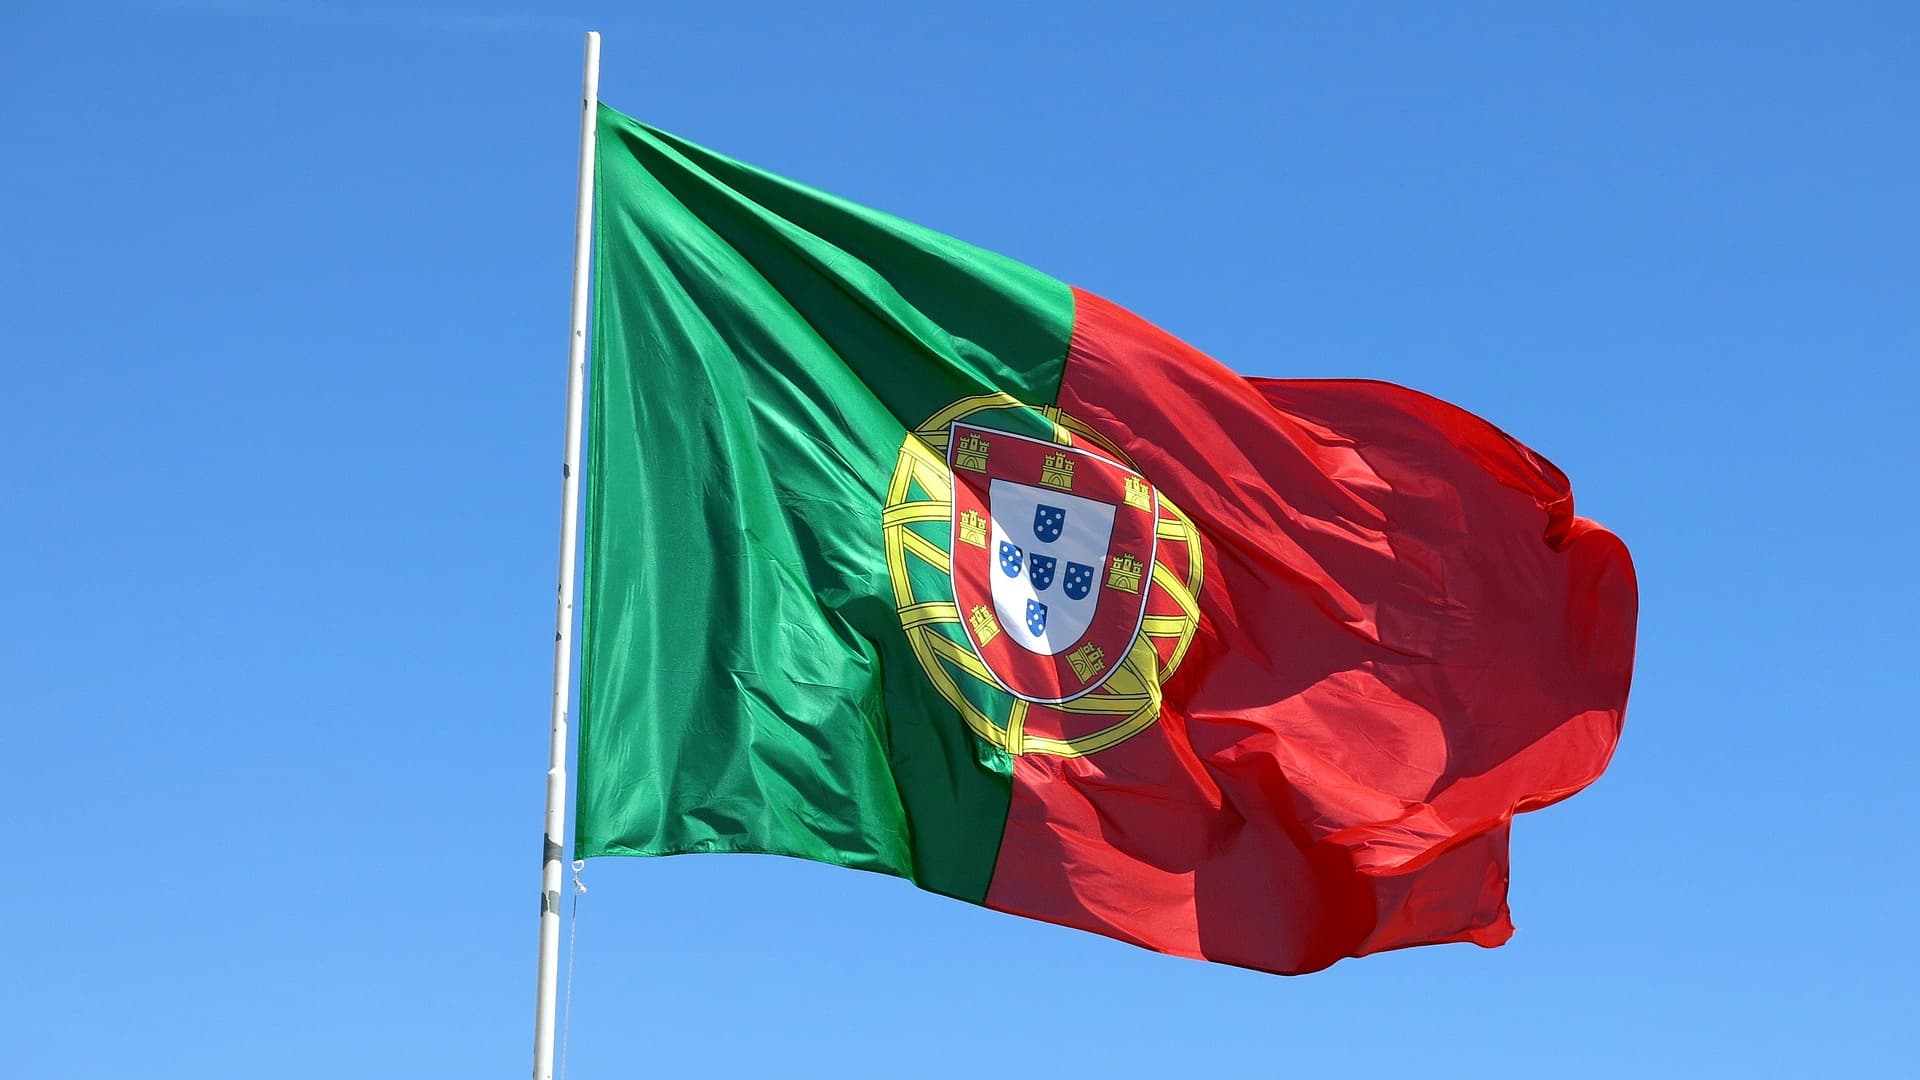 Portugal extends a zero-rate value-added tax on basic food commodities